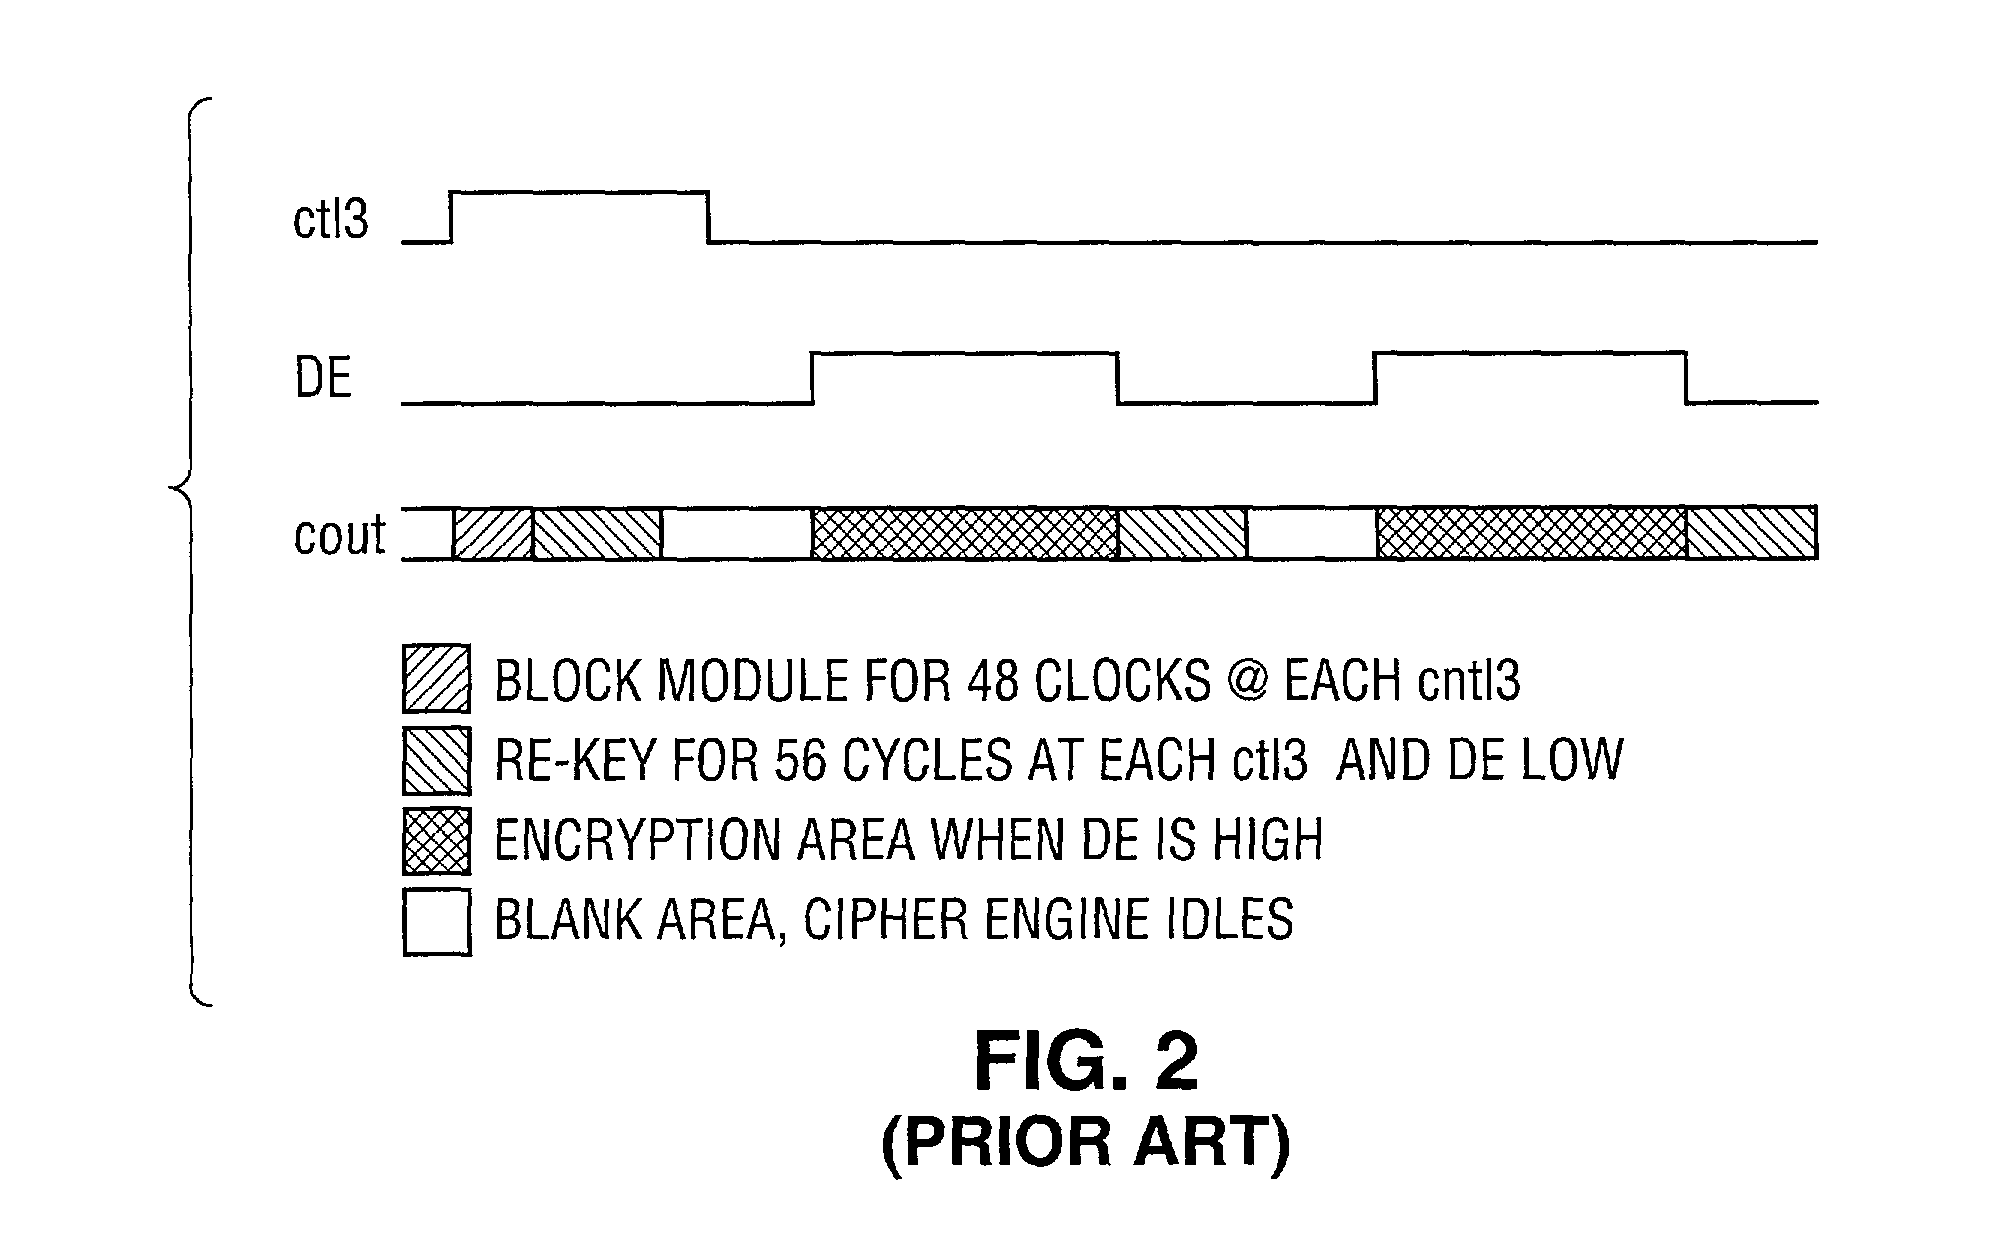 Method and apparatus for sending auxiliary data on a TMDS-like link